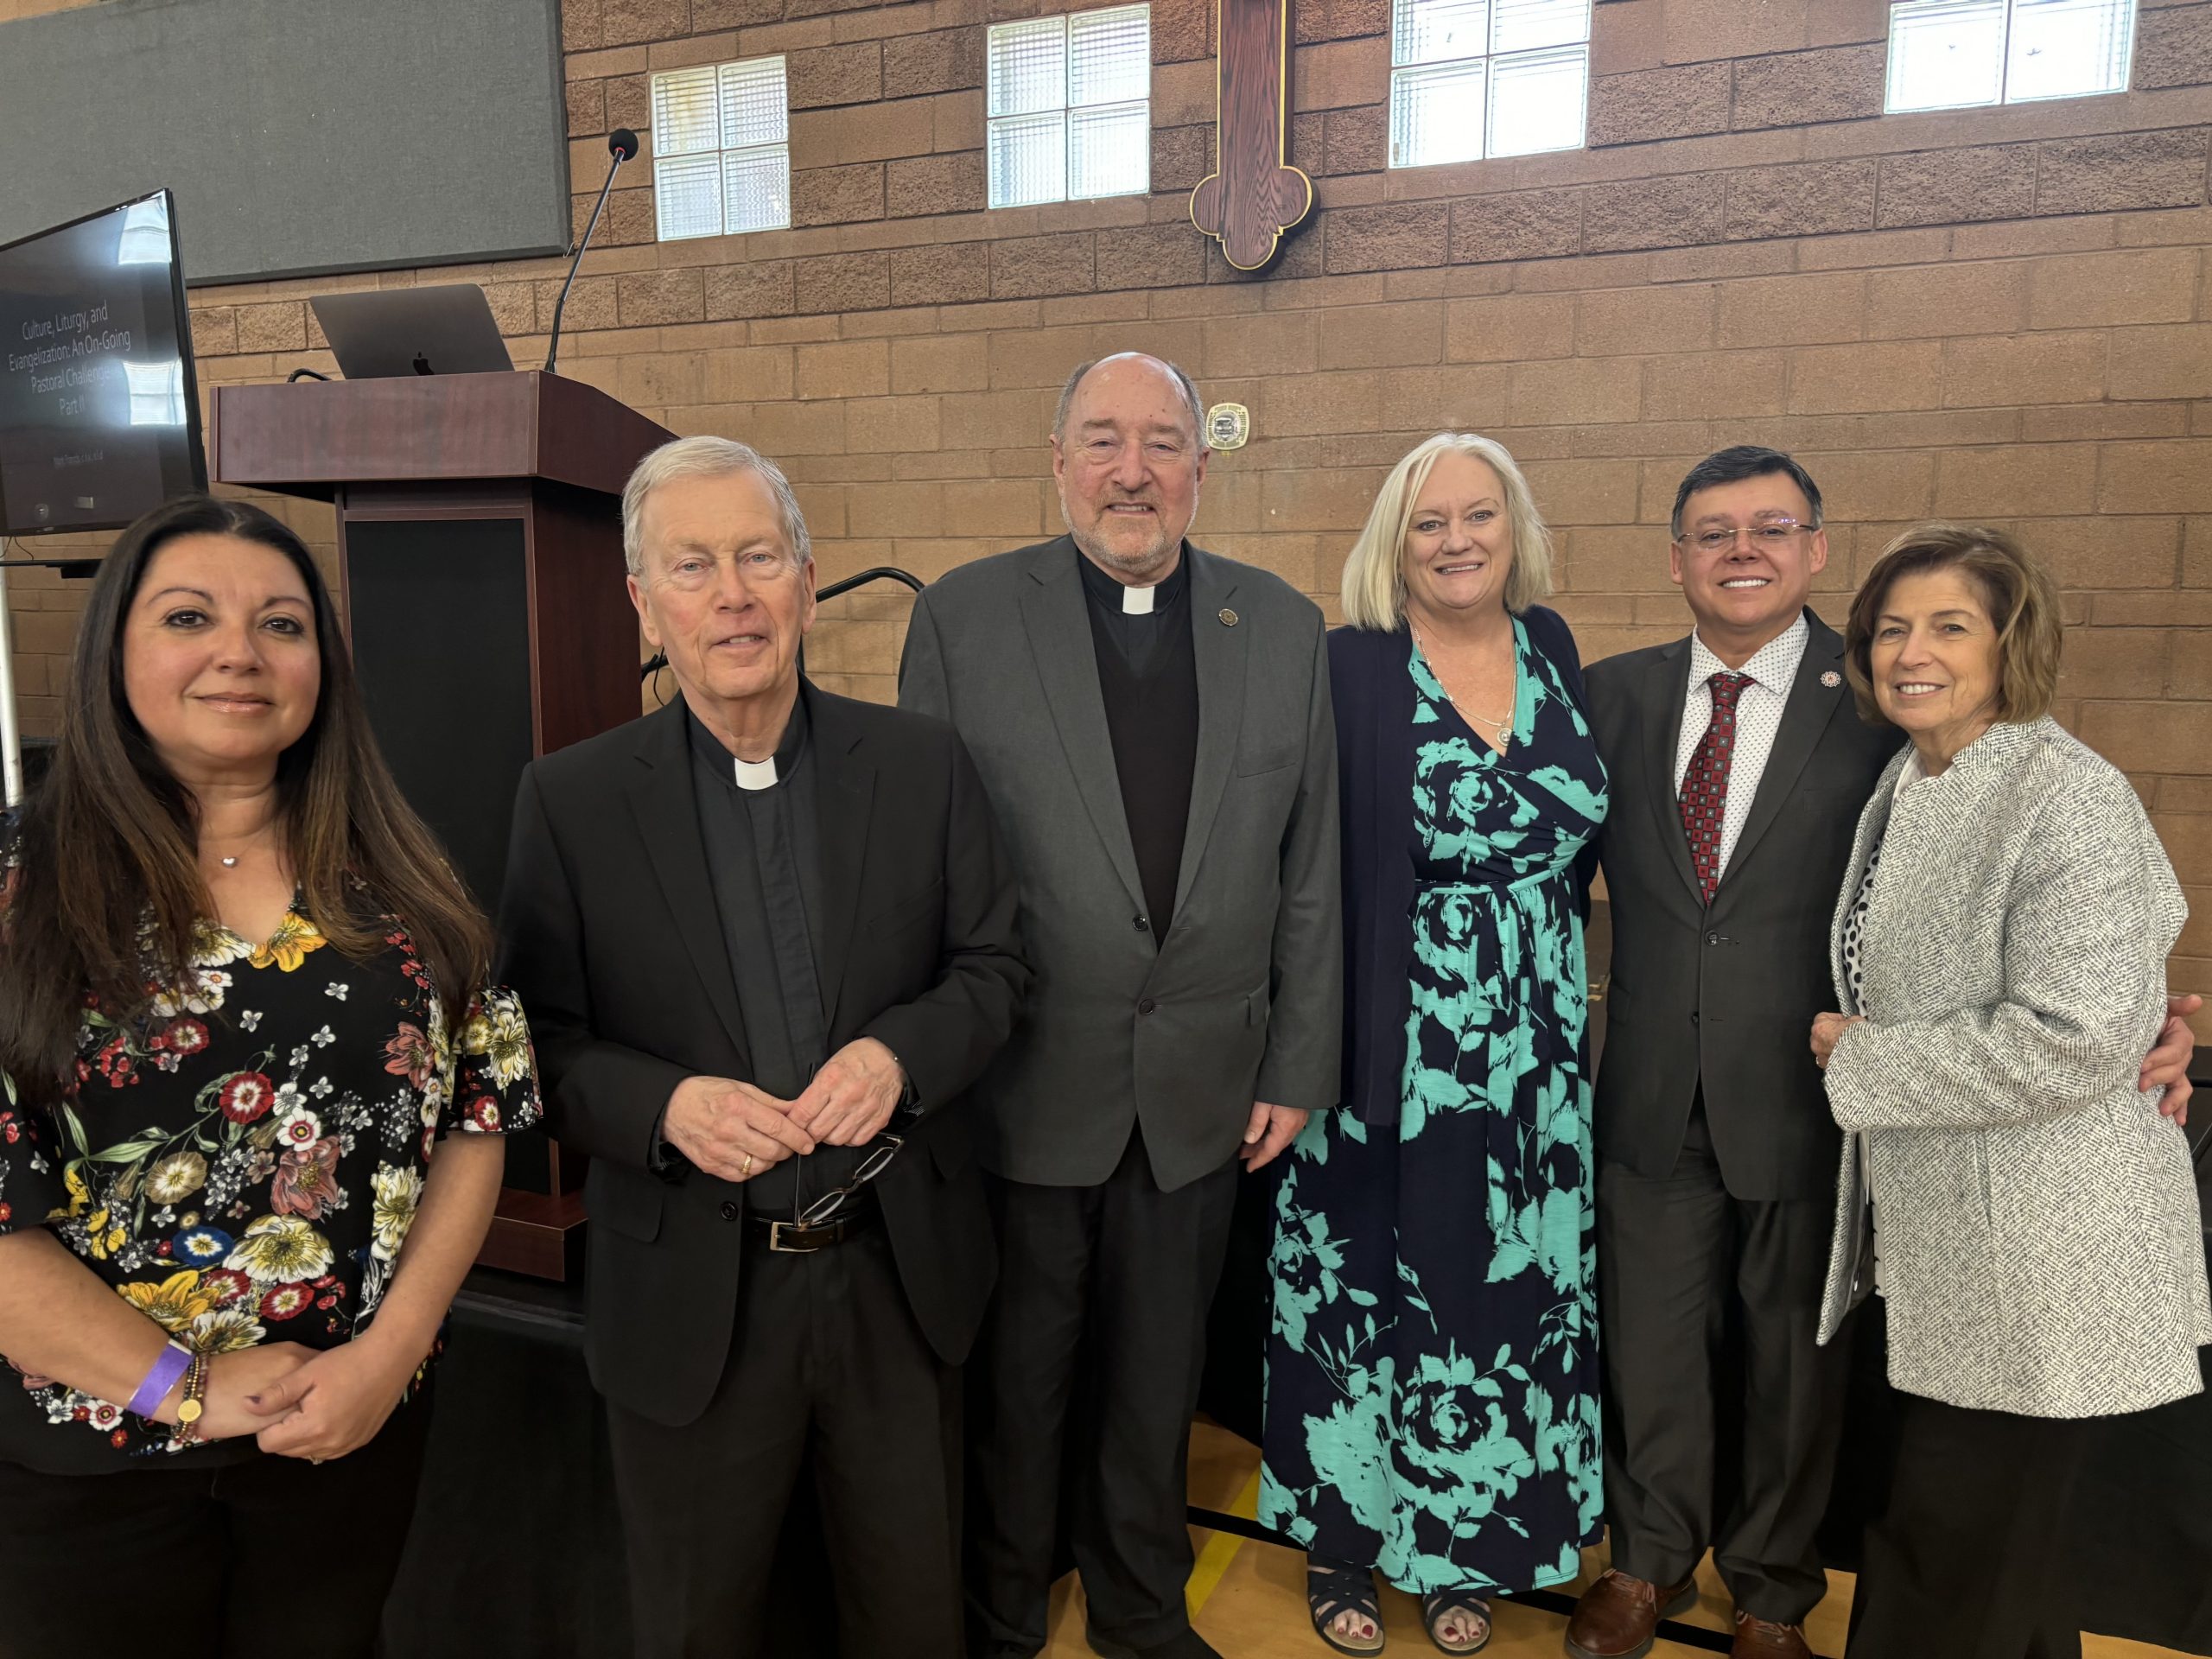 Archdiocese of Las Vegas Hears from Fr. Mark Francis on Interculturality